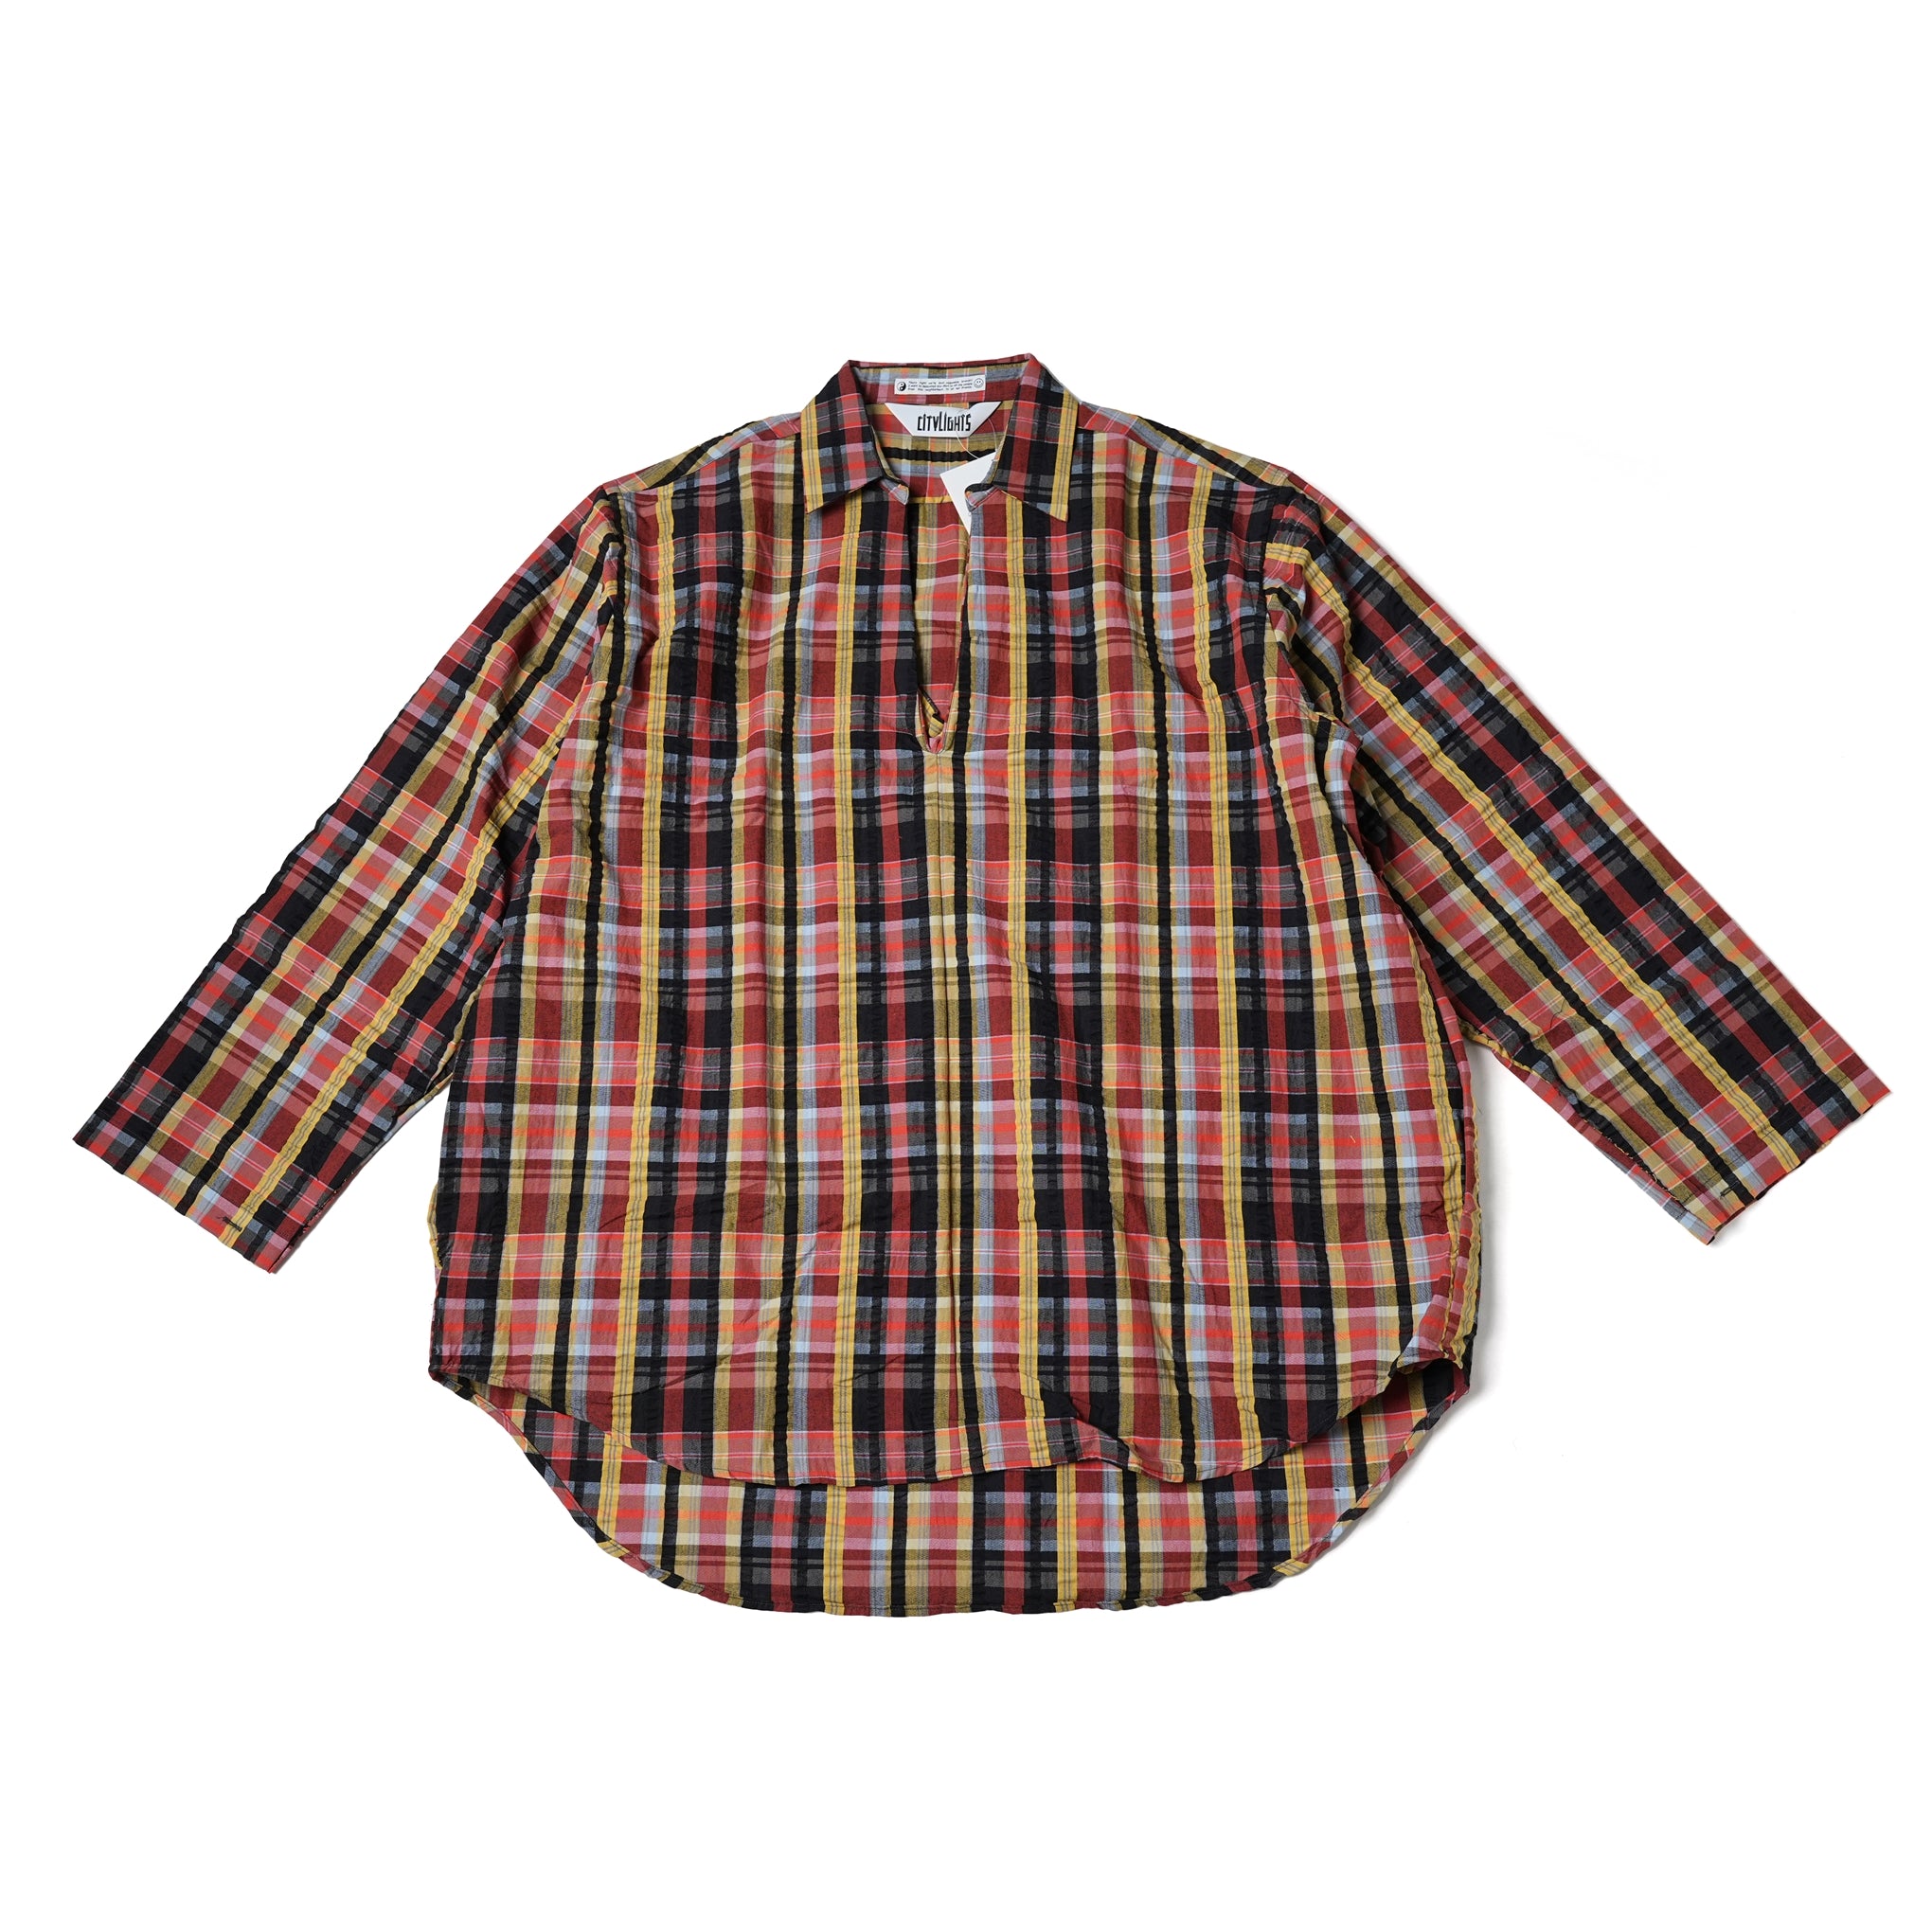 Name: MEX KAFTAN SHIRT | Color:Madrascheck | Size:One 【CITYLIGHTS PRODUCTS_シティライツプロダクツ】